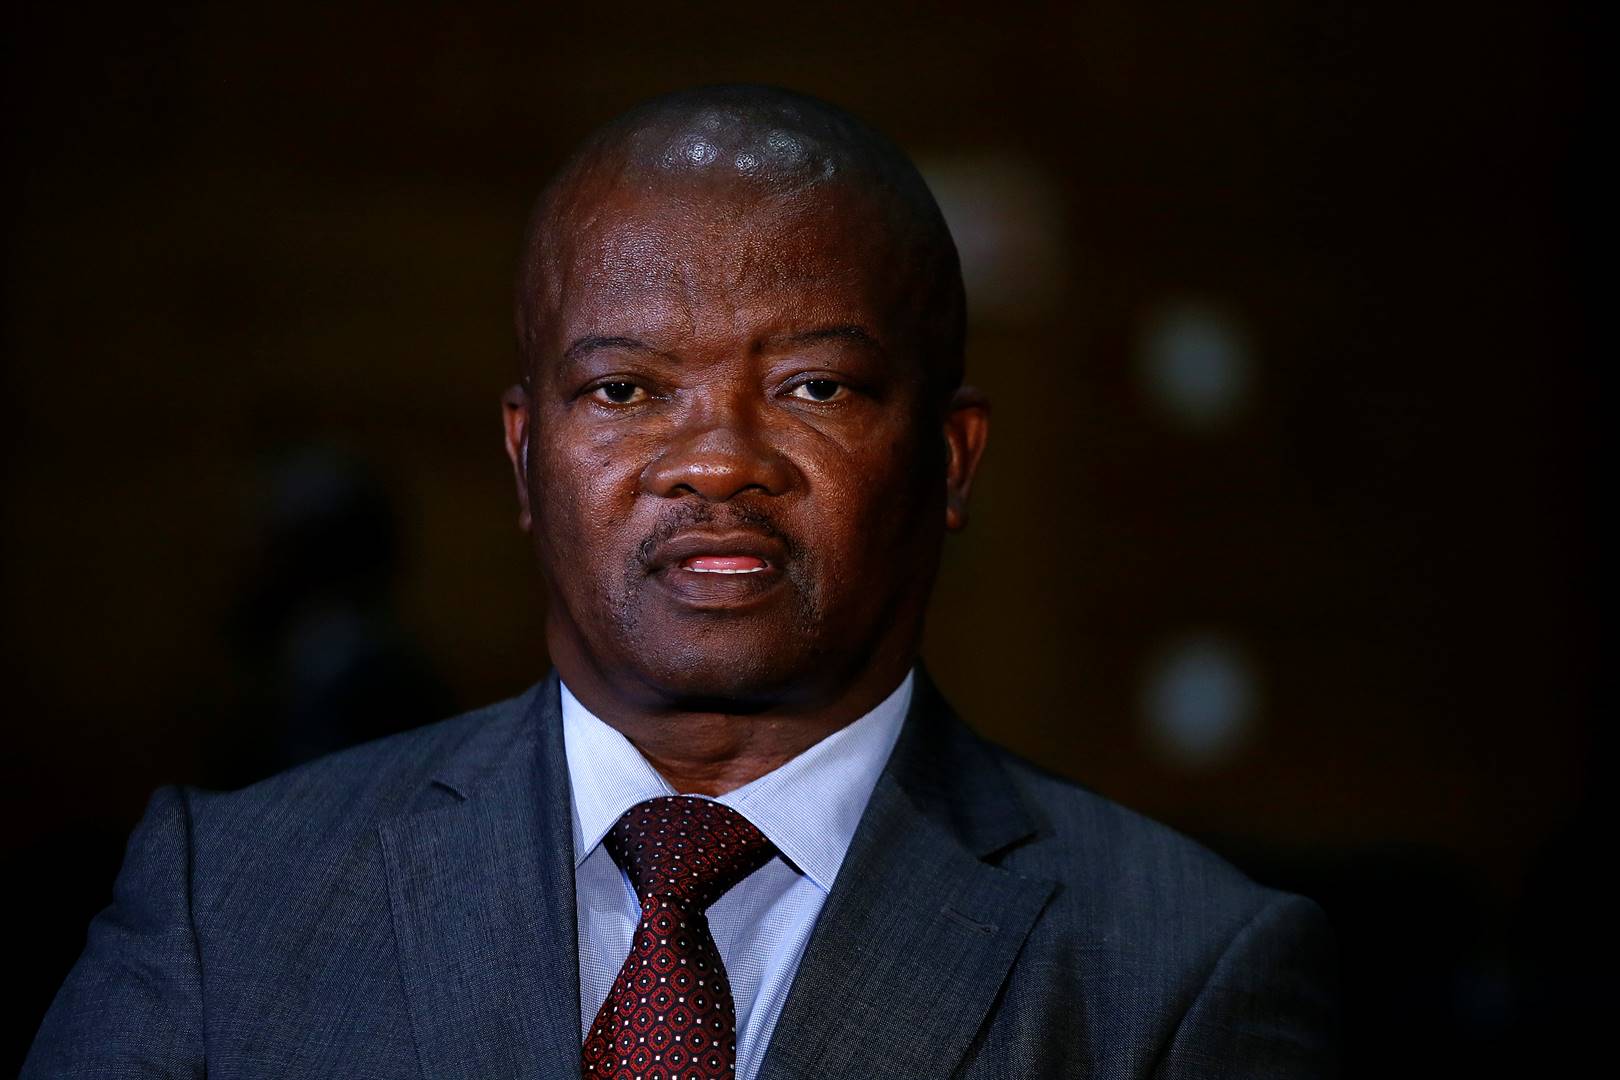 UDM leader Bantu Holomisa says opposition parties will fight against these proposals through the courts.